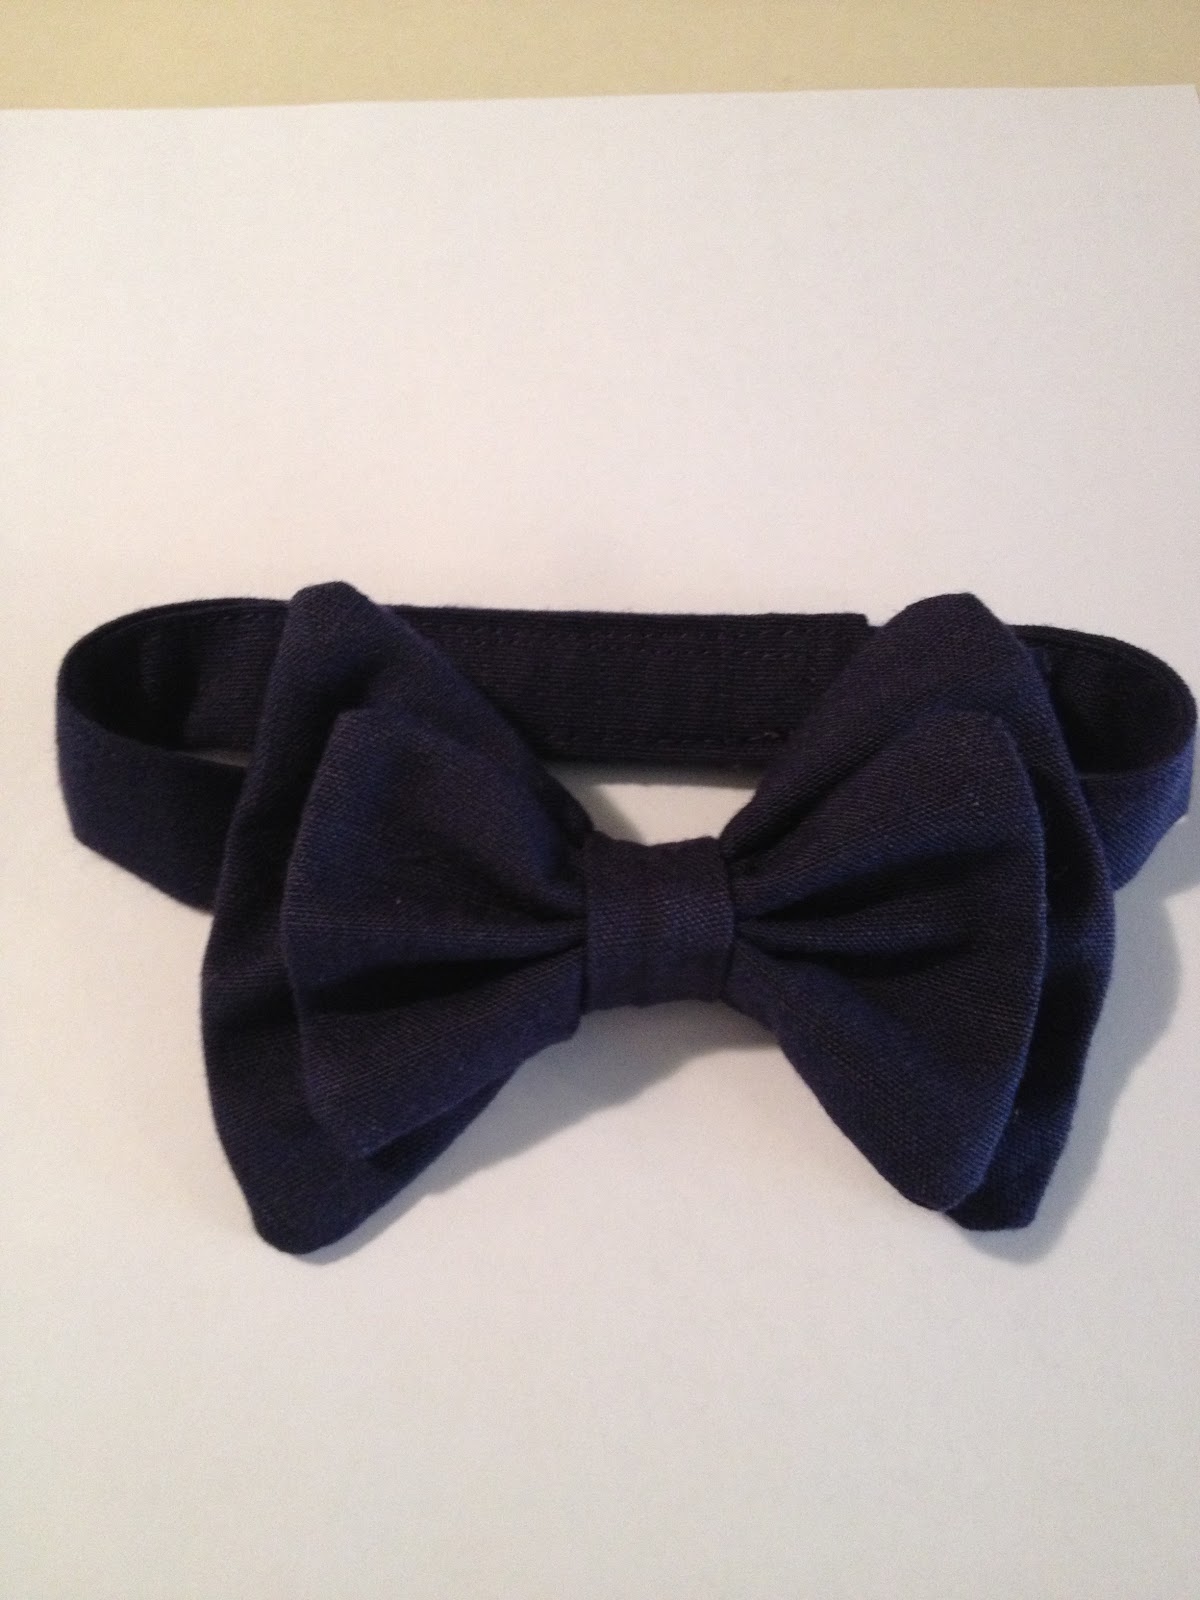 Beth's Bows for Little Doe's: Boys things